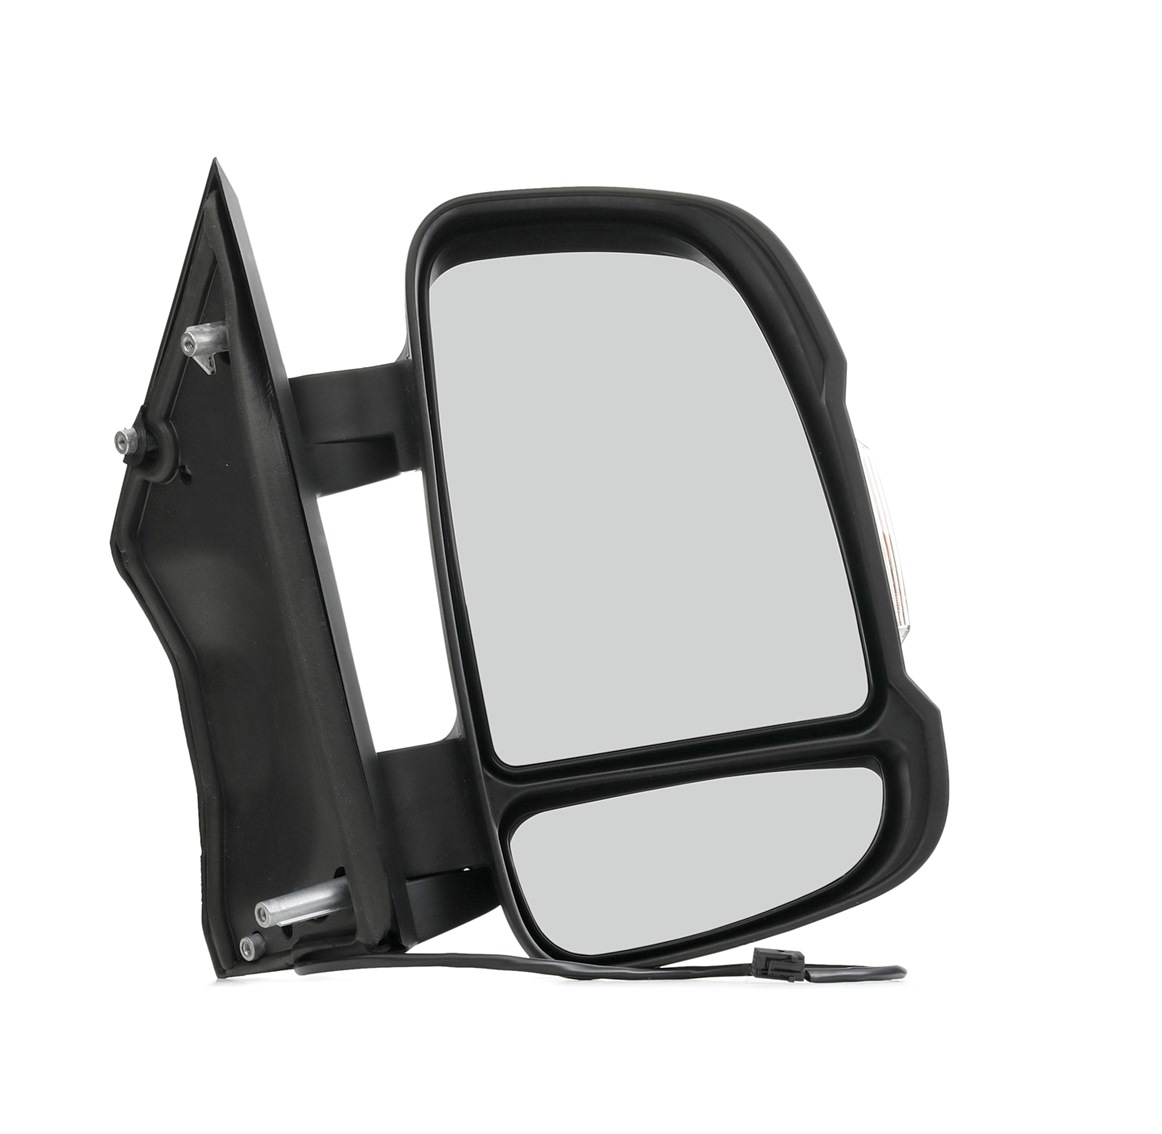 STARK SKOM-1040097 Wing mirror Right, Manual, Complete Mirror, with wide angle mirror, Short mirror arm, Convex, for left-hand drive vehicles